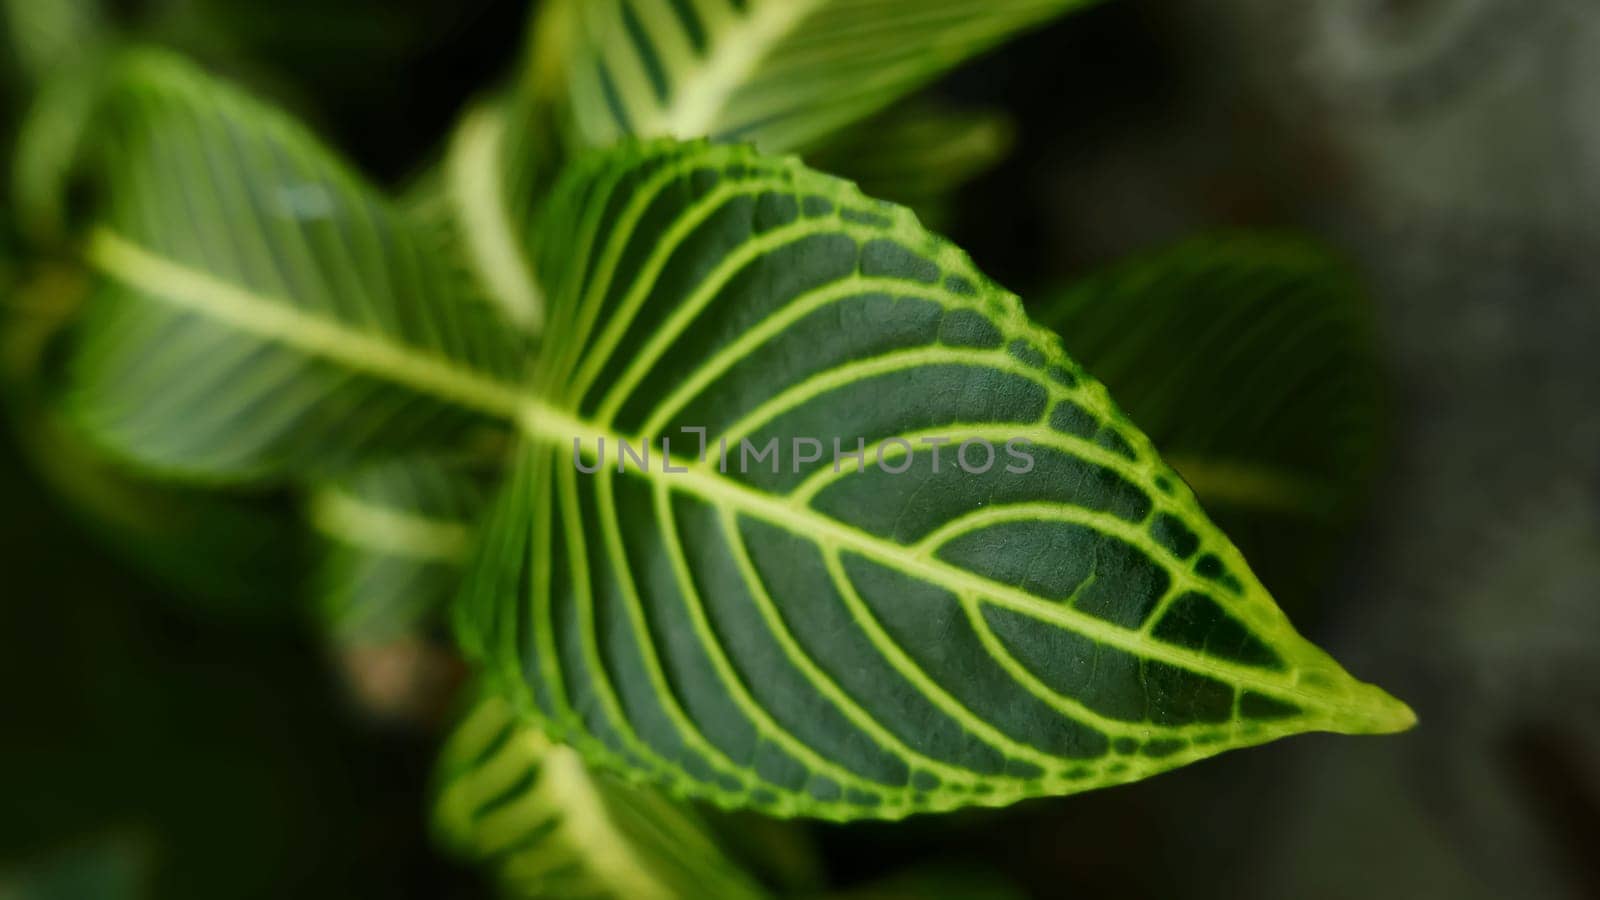 picture of leaves from a plant called Aphelandra squarrosa Nees, from the genus of Acanthaceae, or also known as Zebra Plant in garden and pots